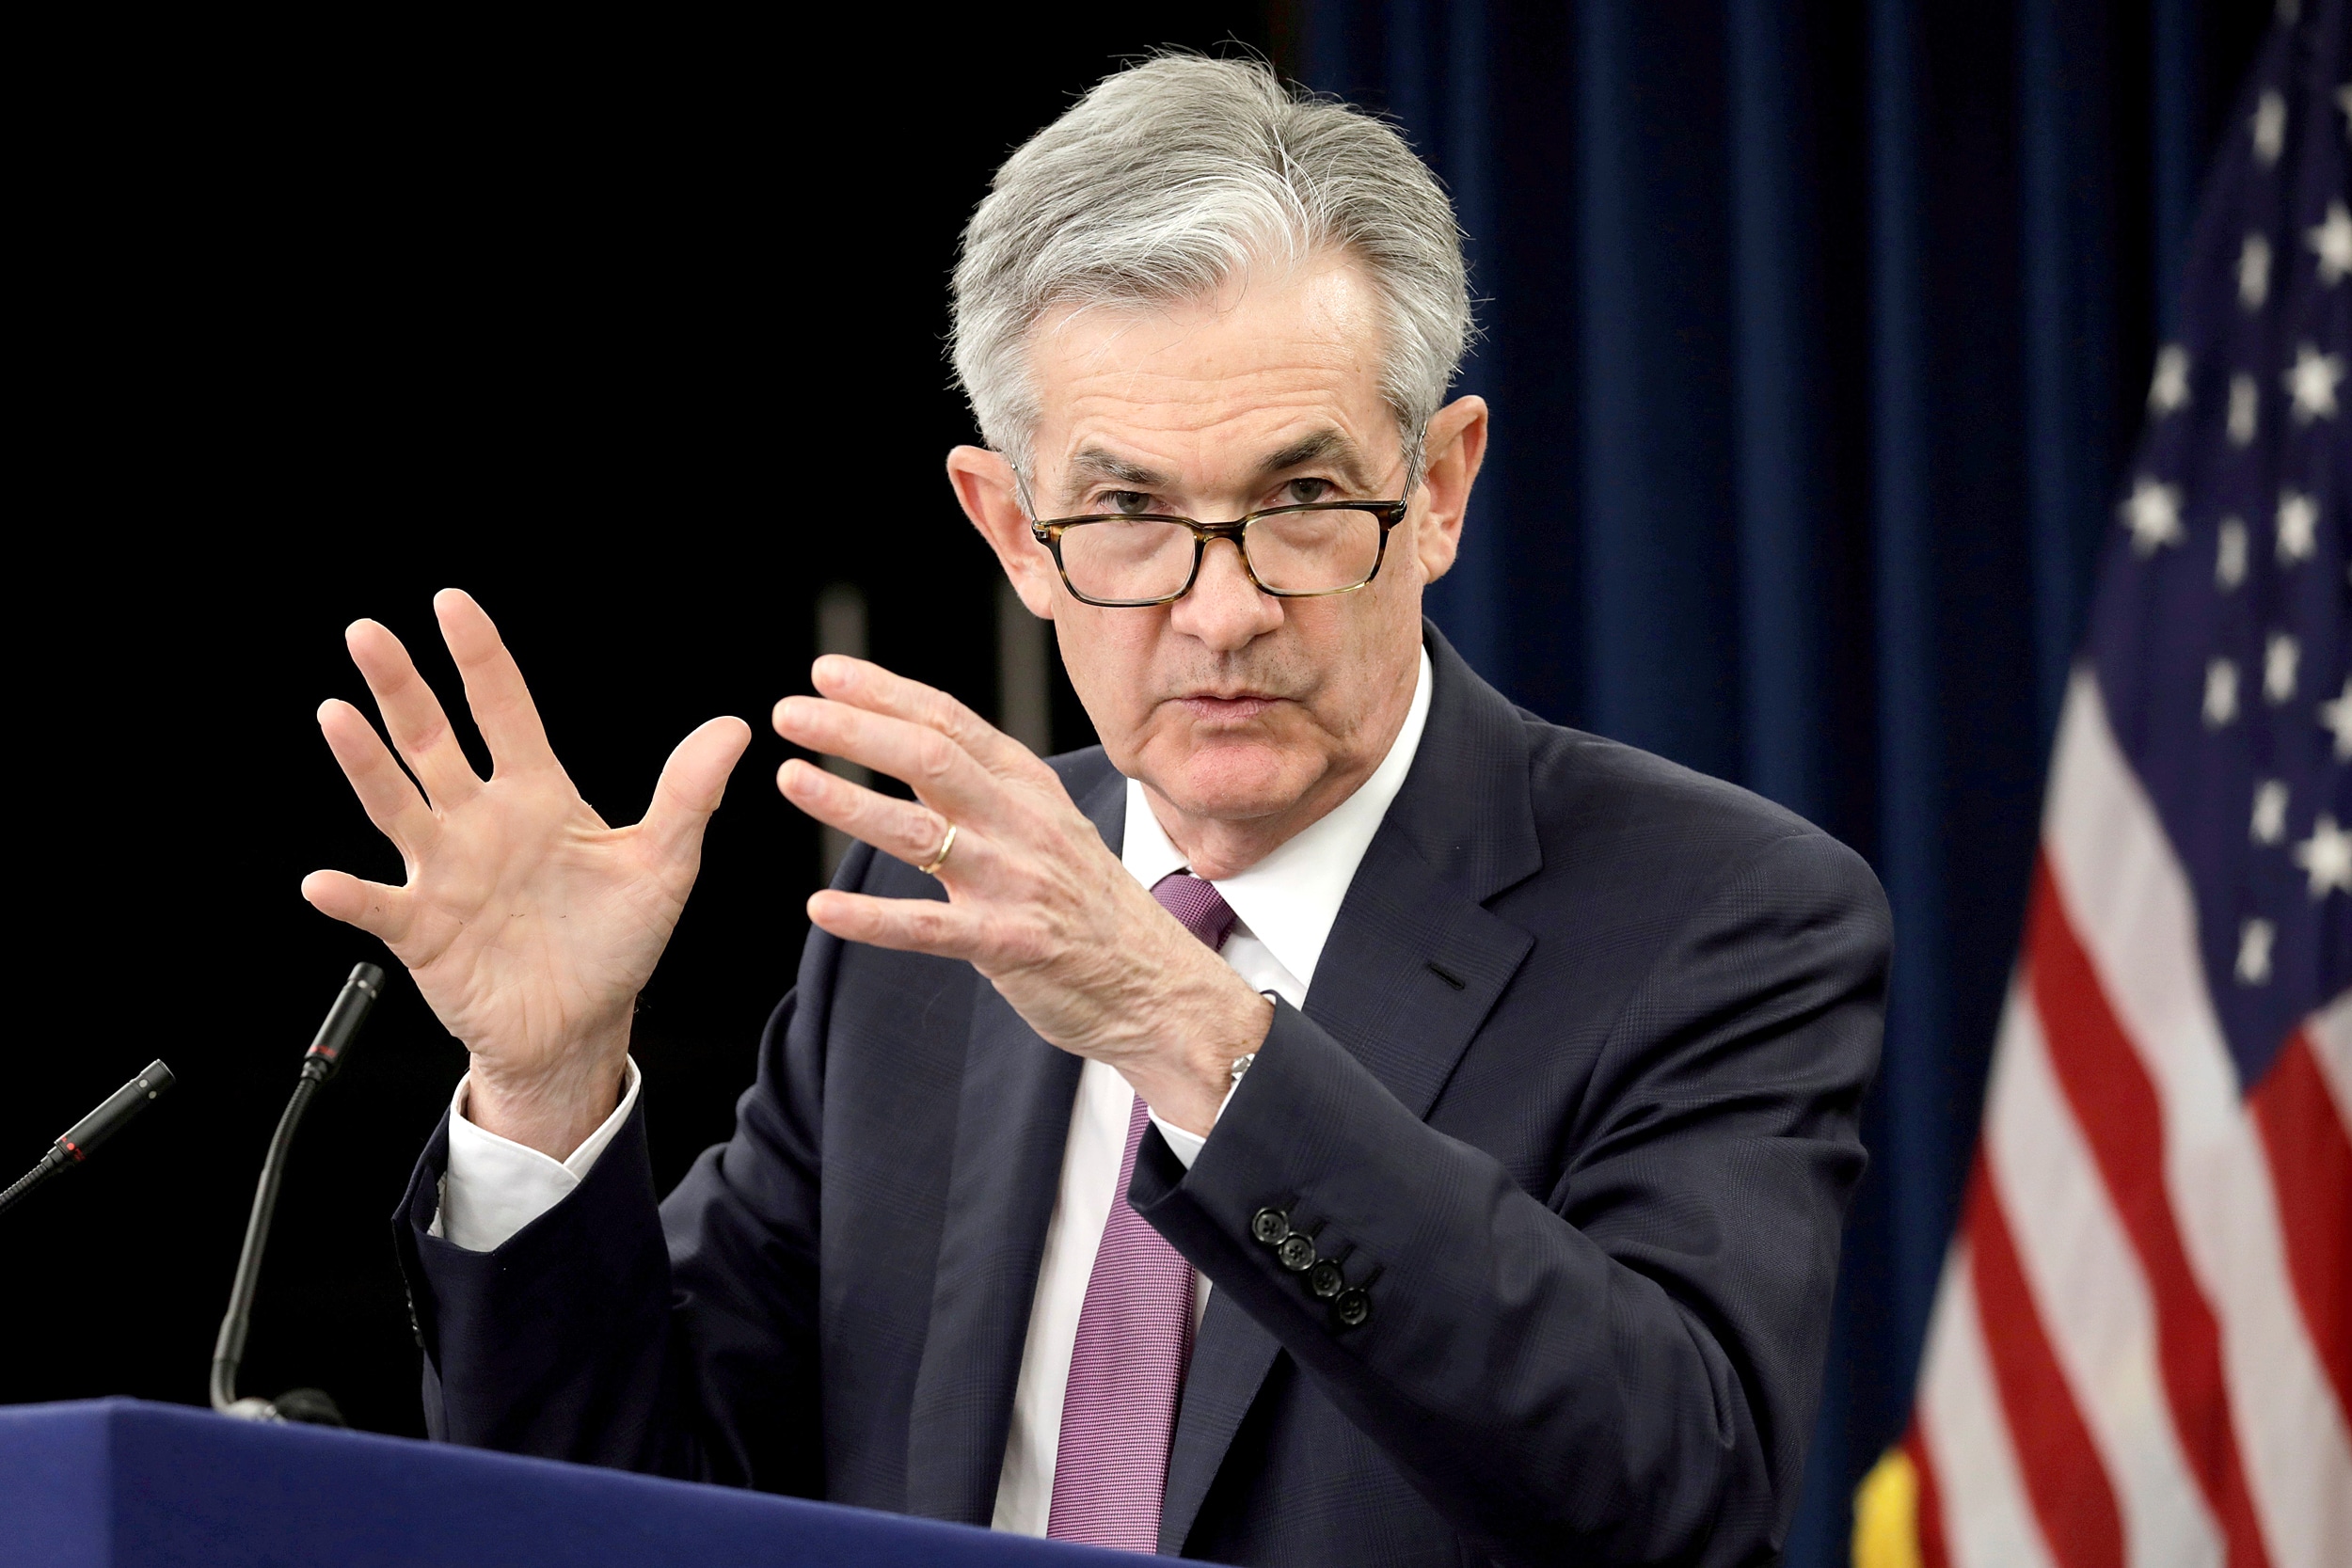 FILE PHOTO: Federal Reserve Board Chairman Jerome Powell speaks at his news conference following the closed two-day Federal Open Market Committee meeting in Washington, U.S., May 1, 2019. REUTERS/Yuri Gripas/File Photo